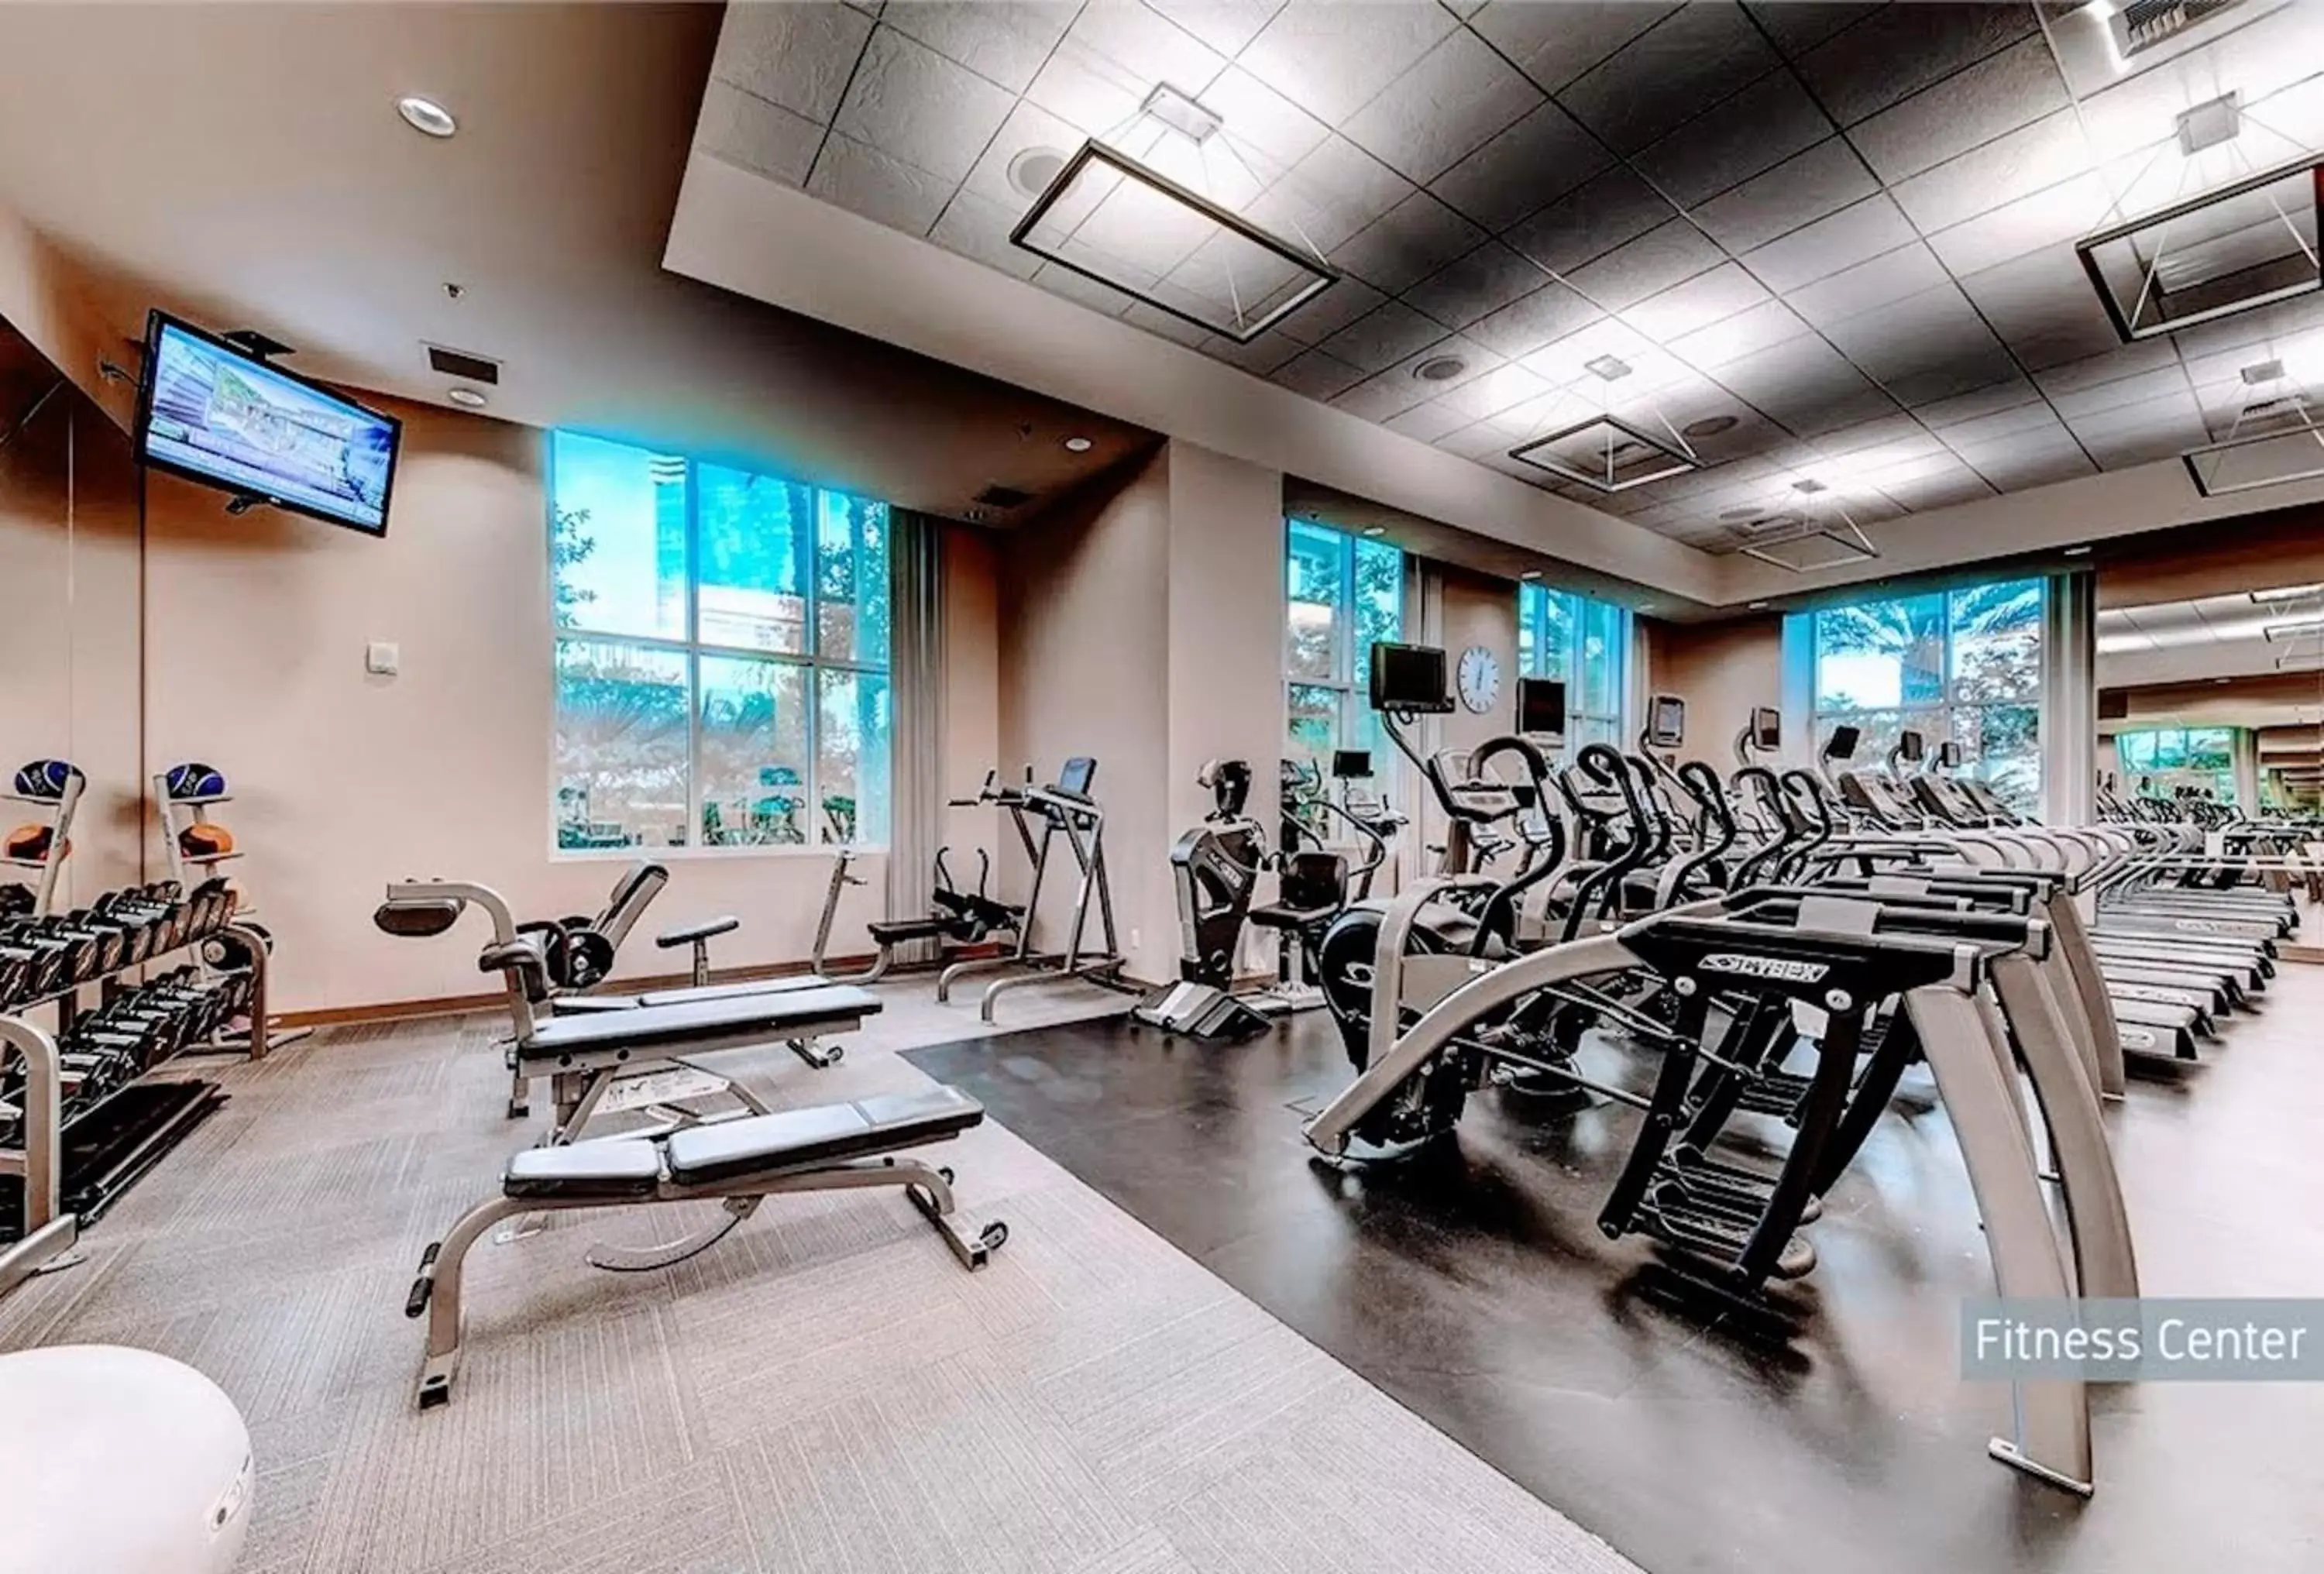 Fitness centre/facilities, Fitness Center/Facilities in MGM Signature Strip view balcony full kitchen - 1 Br suite 2 full bath - F1 track view